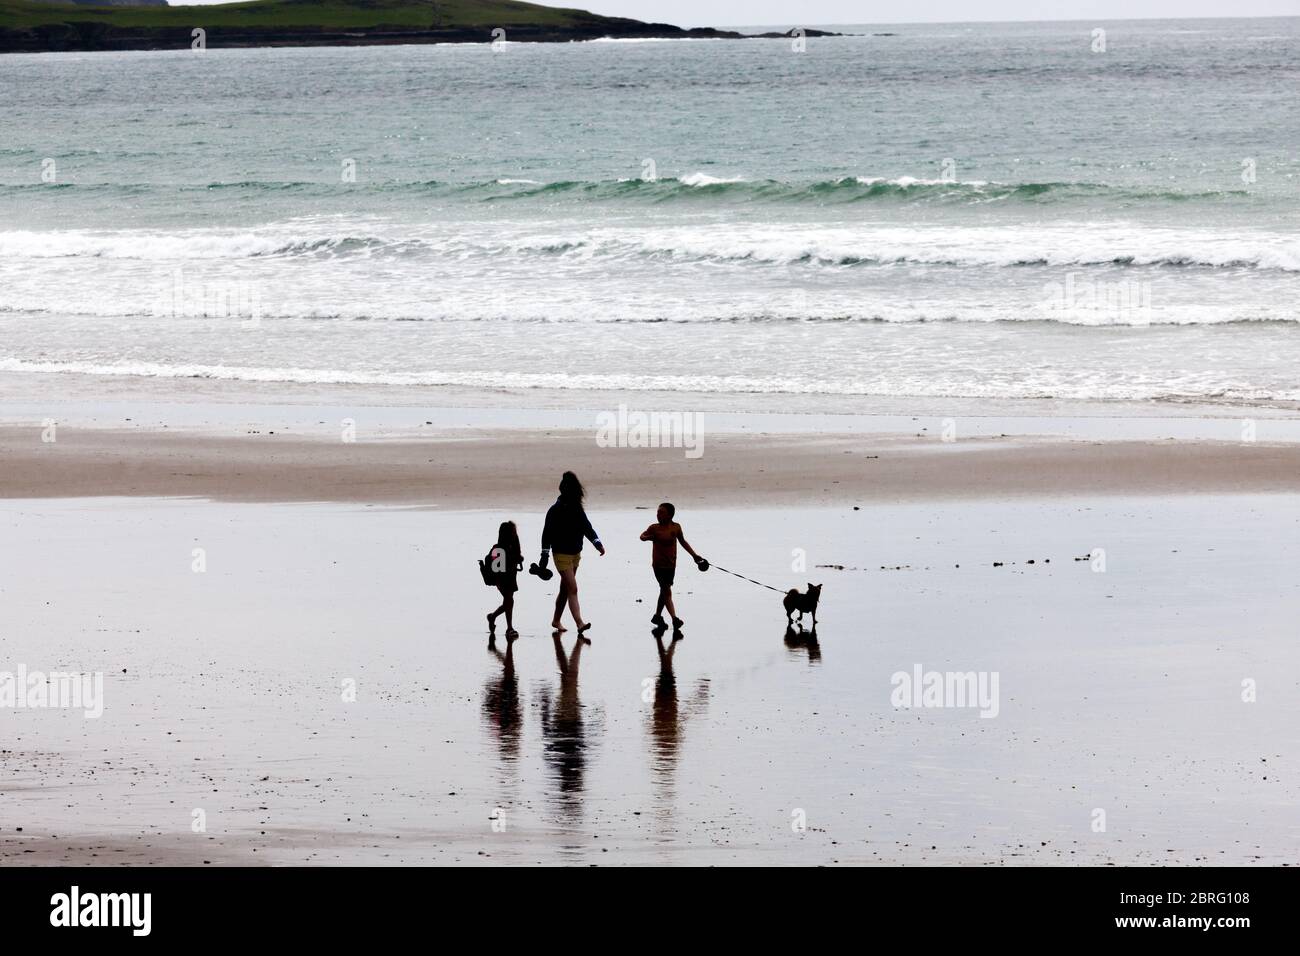 Garrettstown, Cork, Ireland. 21st May, 2020. A group taking advantage of the lifting of some Covid-19 restrictions to visit the beach at Garrettstown, Co. Cork, Ireland. - Credit; David Creedon / Alamy Live News Stock Photo